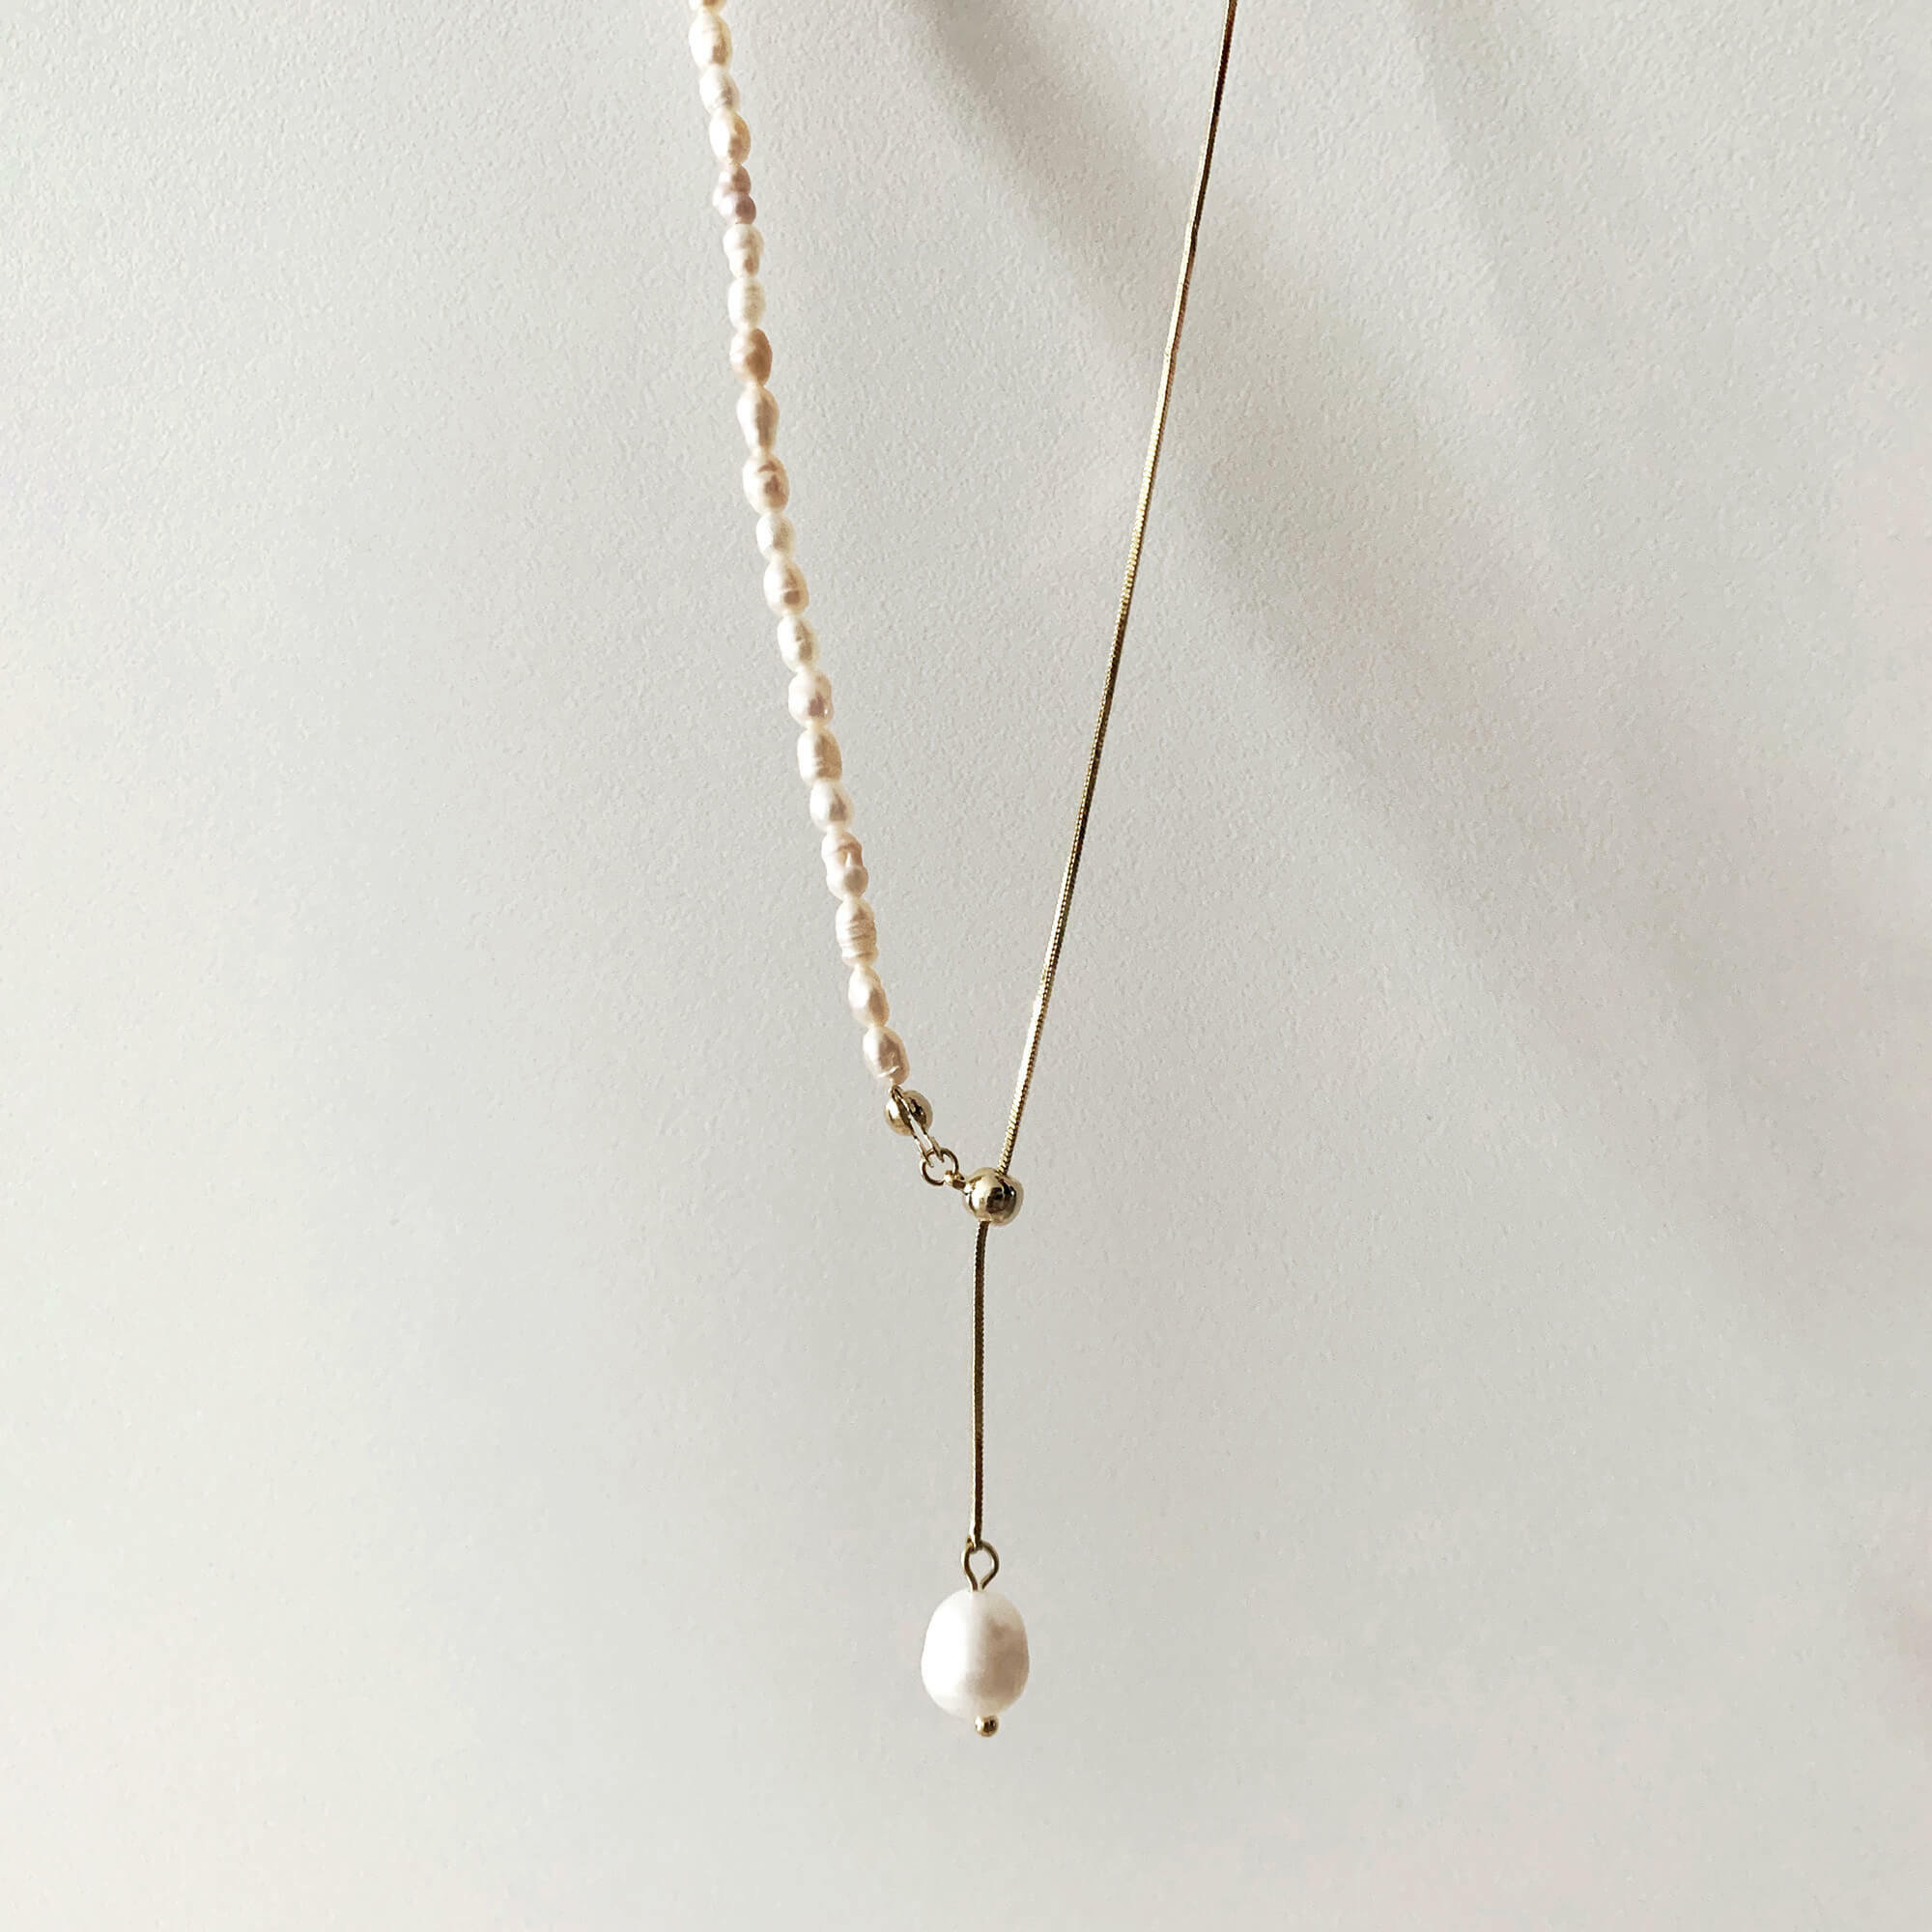 Make a Chain & Pearl Lariat Necklace - YouTube